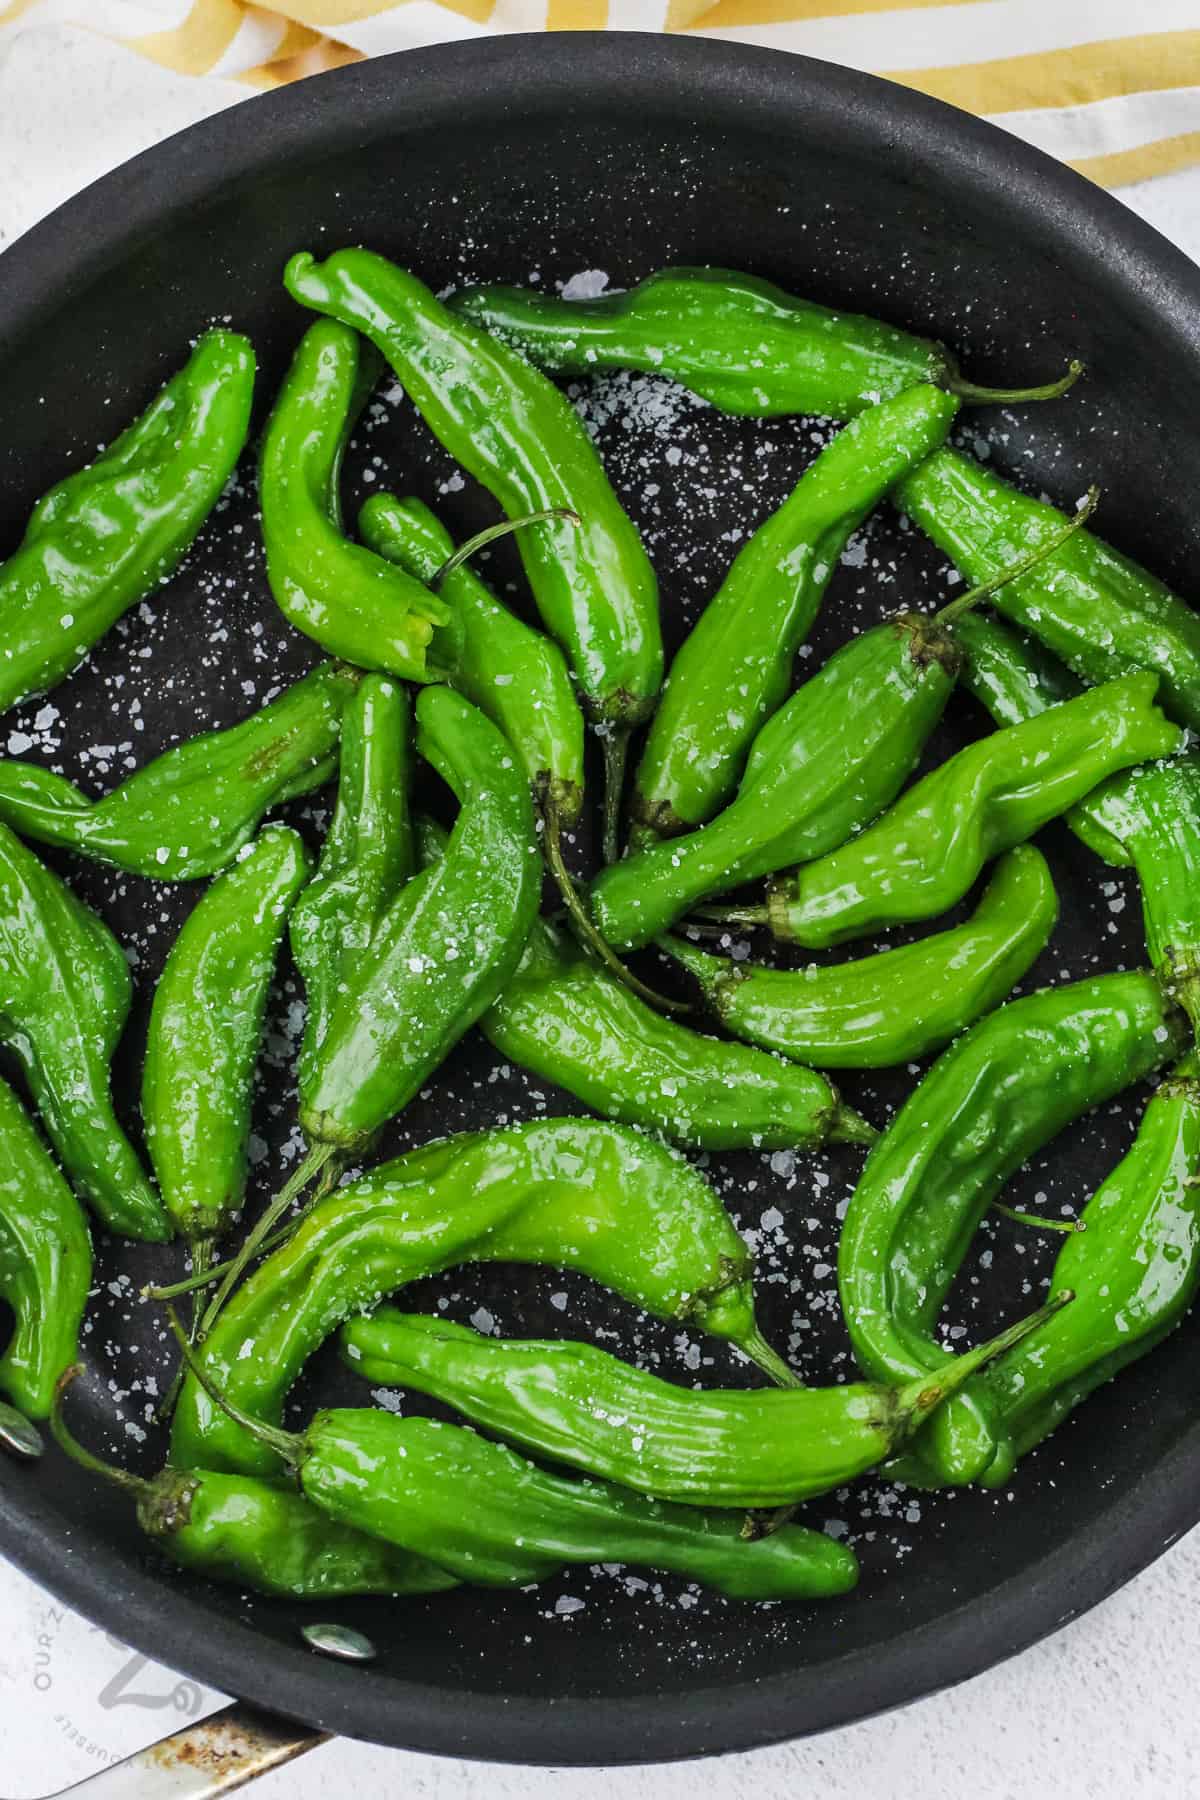 blistered shishito peppers in a frying pan with salt before being cooked